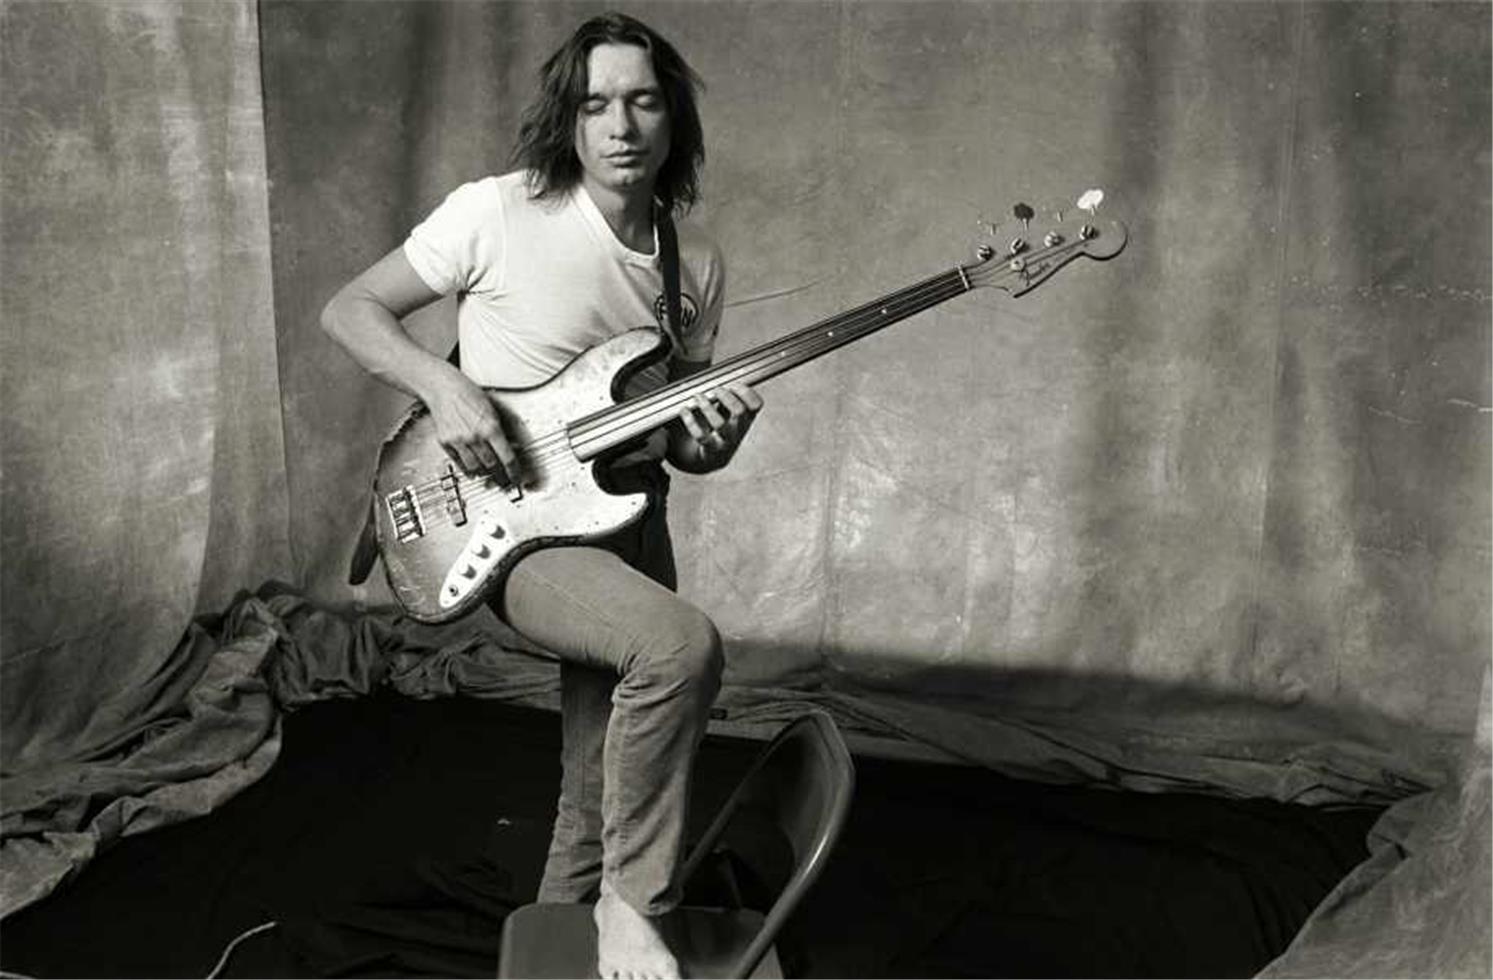 JACO PASTORIUS Film and Band Concert at The | Miami Art Guide